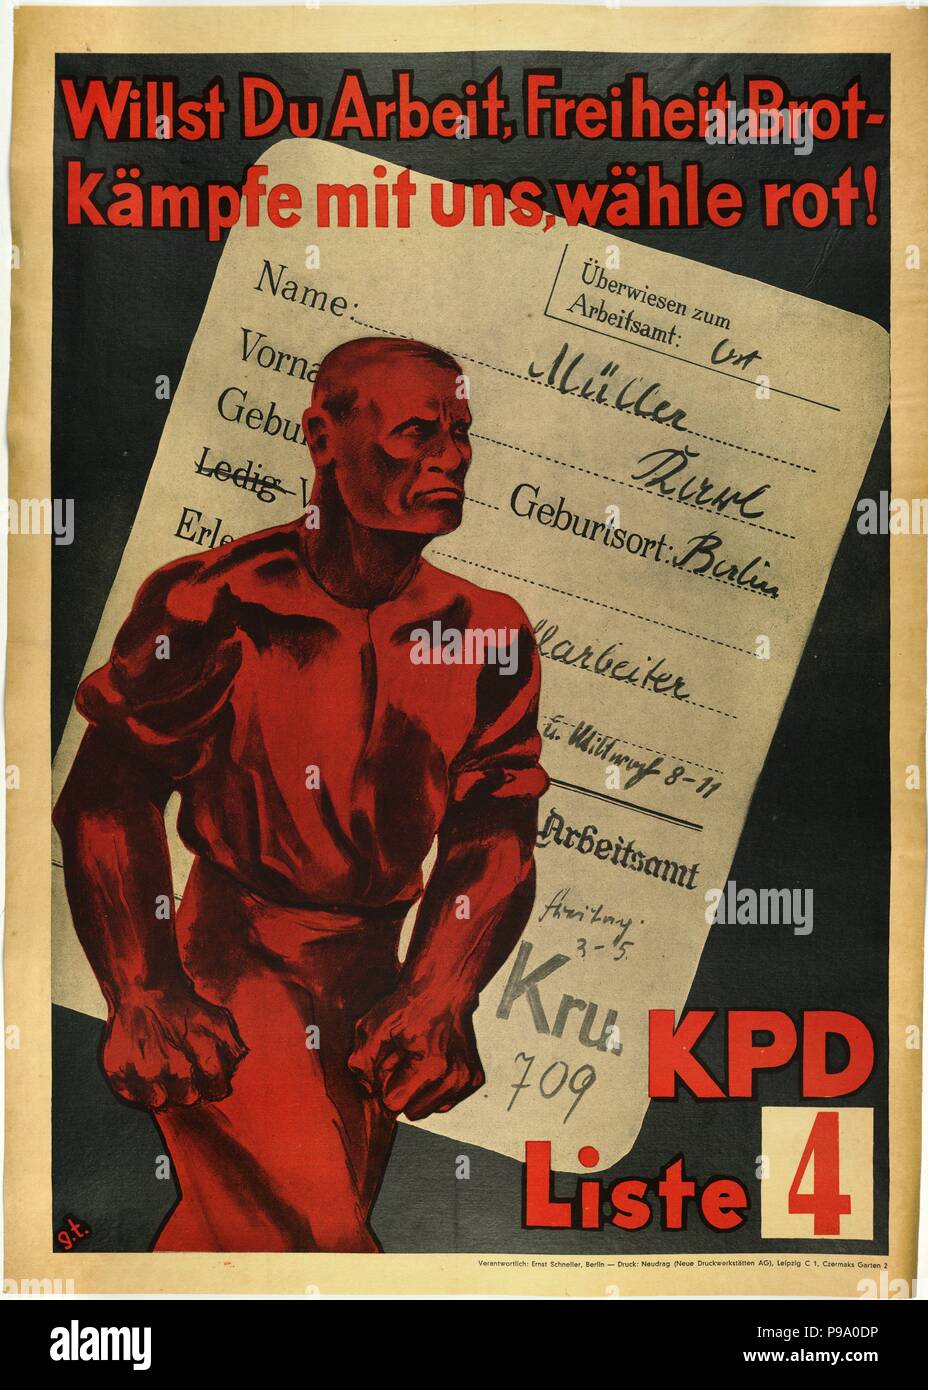 Do you want Work, Freedom, Bread? Fight with us, vote red! KPD, List 4. Museum: PRIVATE COLLECTION. Stock Photo